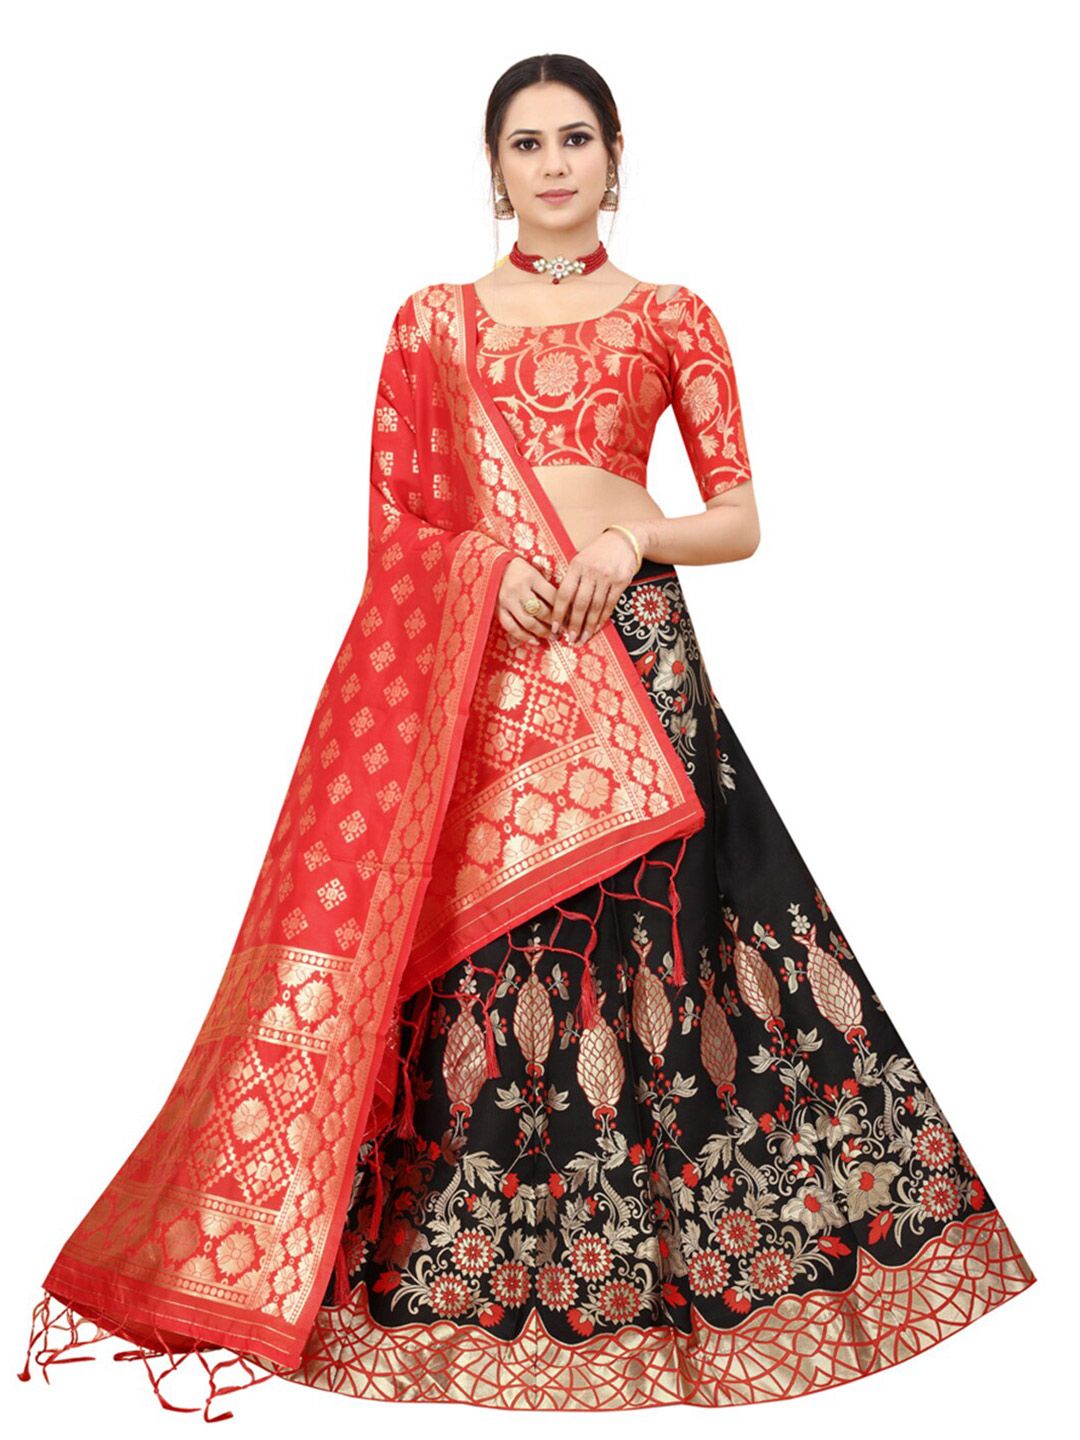 Xenilla Black & Red Embroidered Semi-Stitched Lehenga & Blouse With Dupatta Price in India